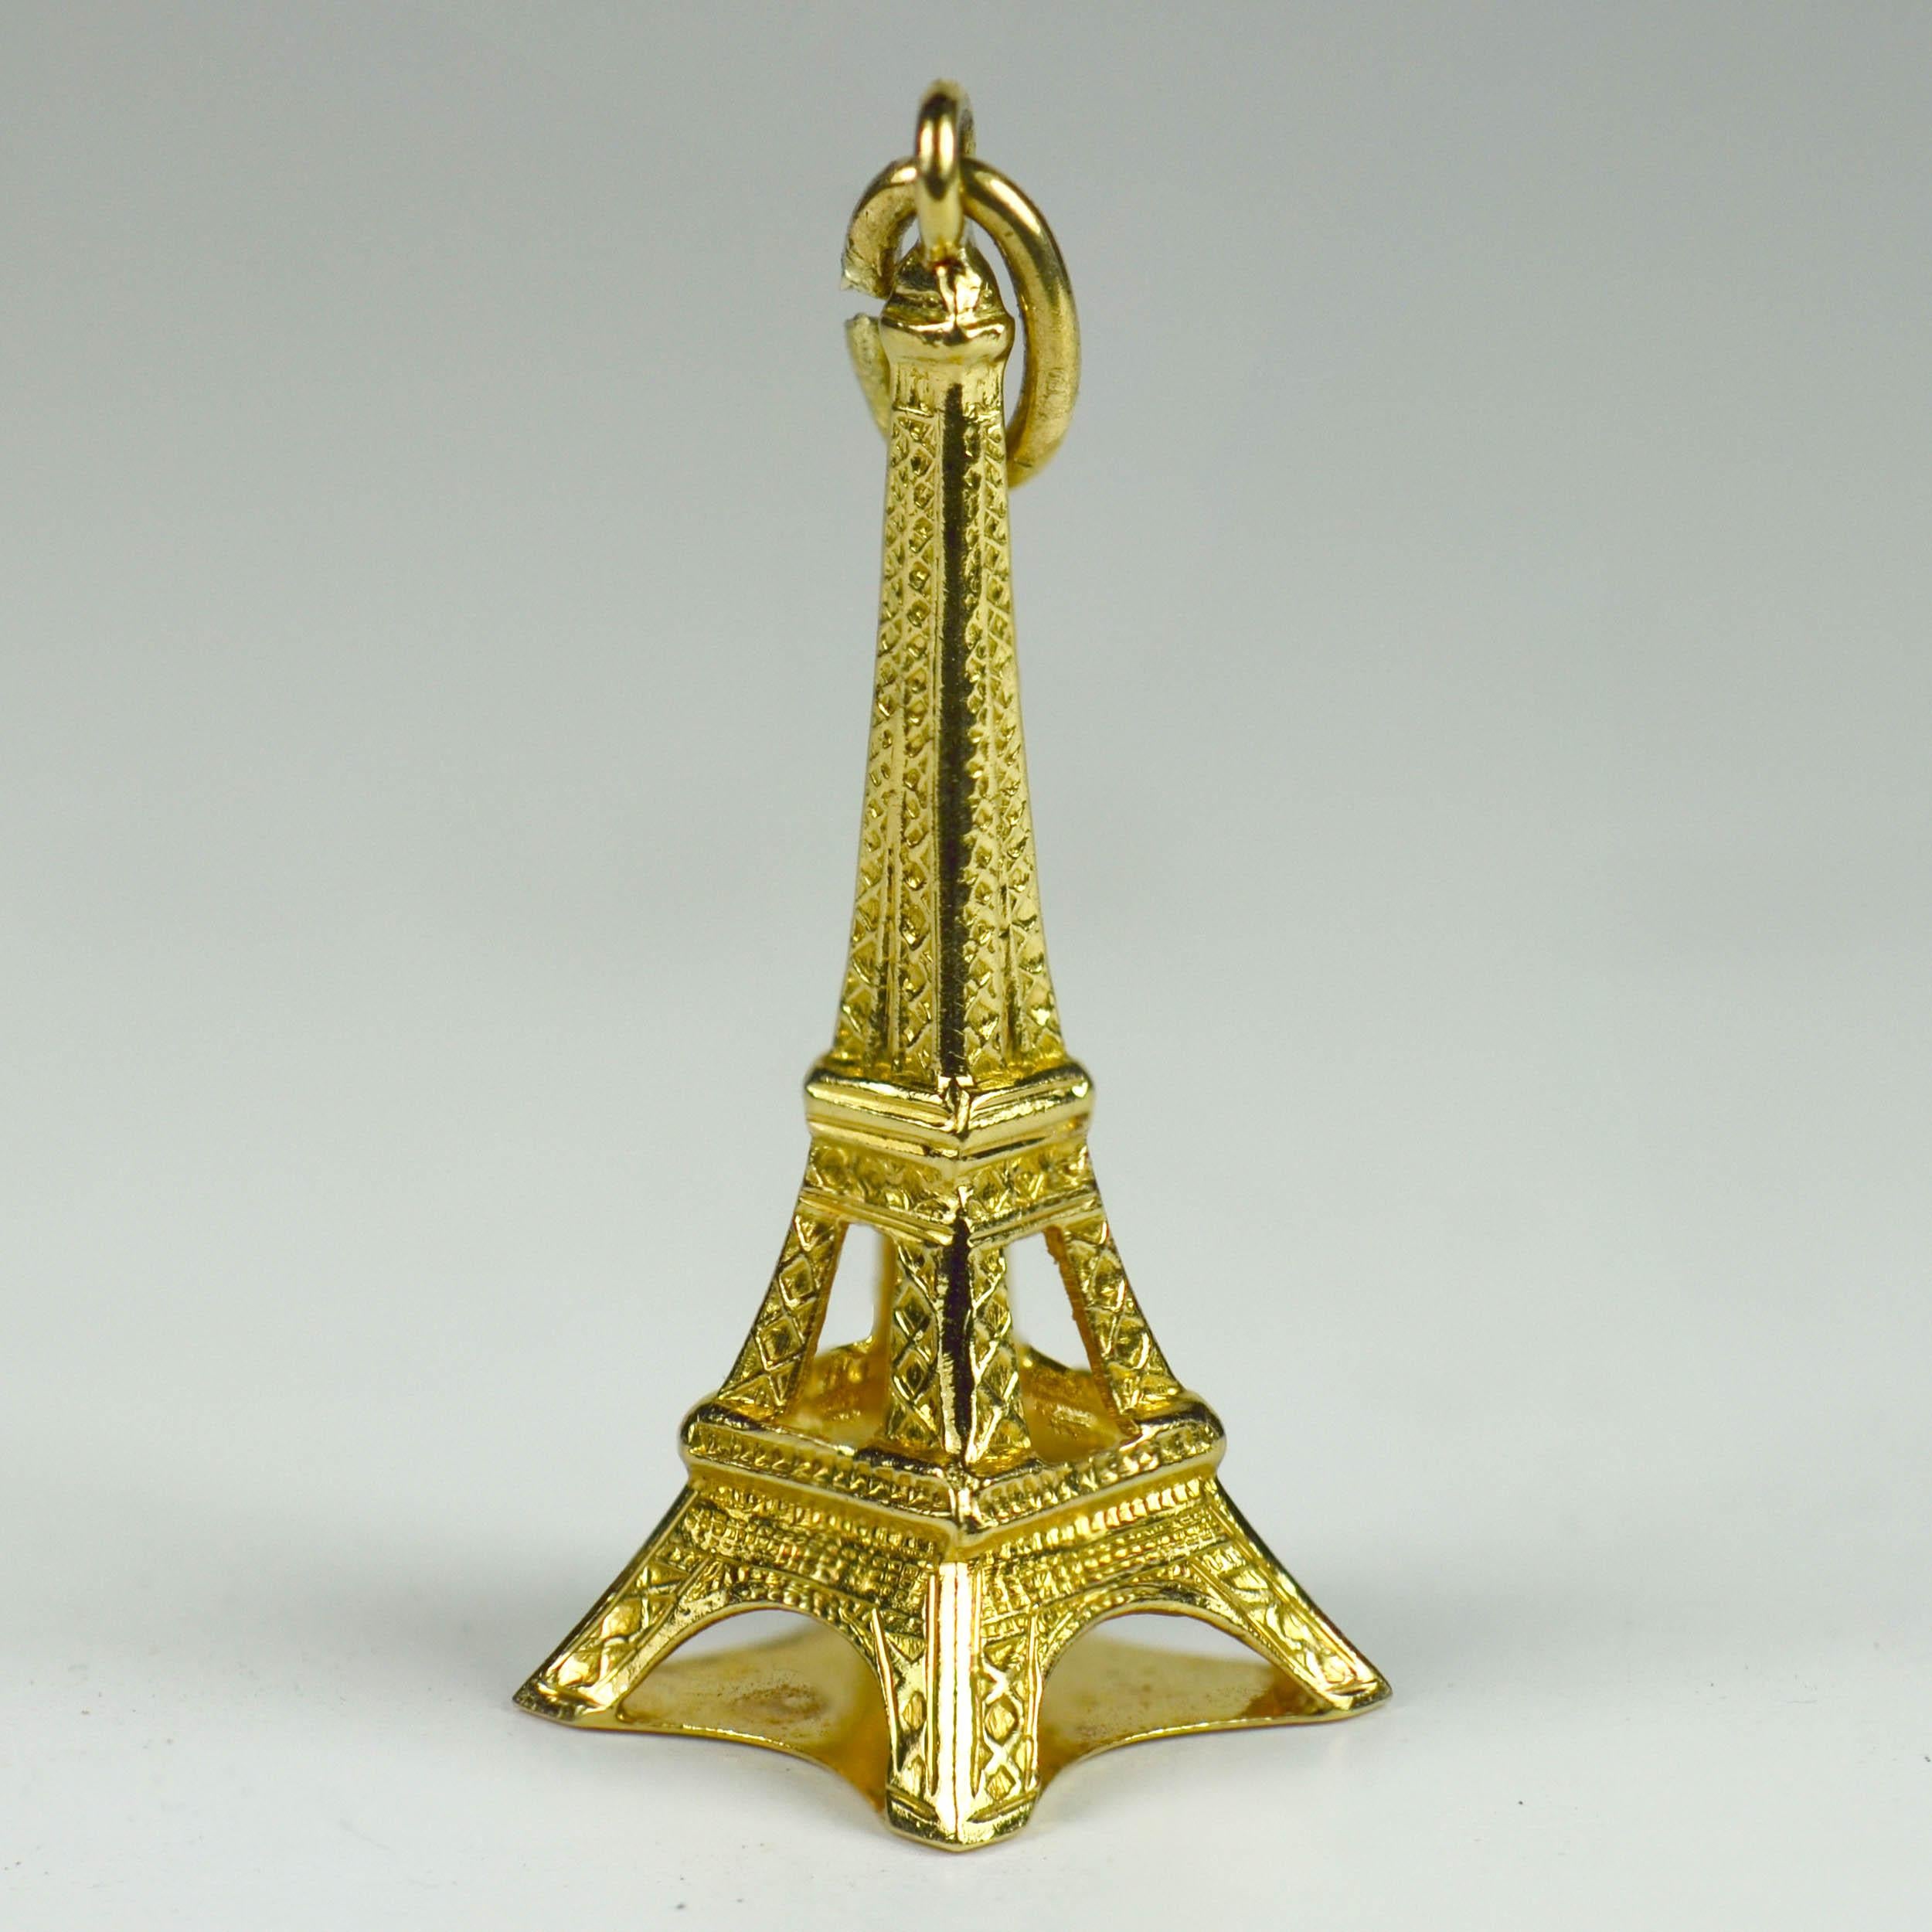 An 18 karat yellow gold charm designed as the Eiffel Tower. 
Marked CB for Carl Baumeister and 750 for 18 karat gold.

Measurements: 4 x 1.2 x 1.2cm
Weight: 3.17 grams.